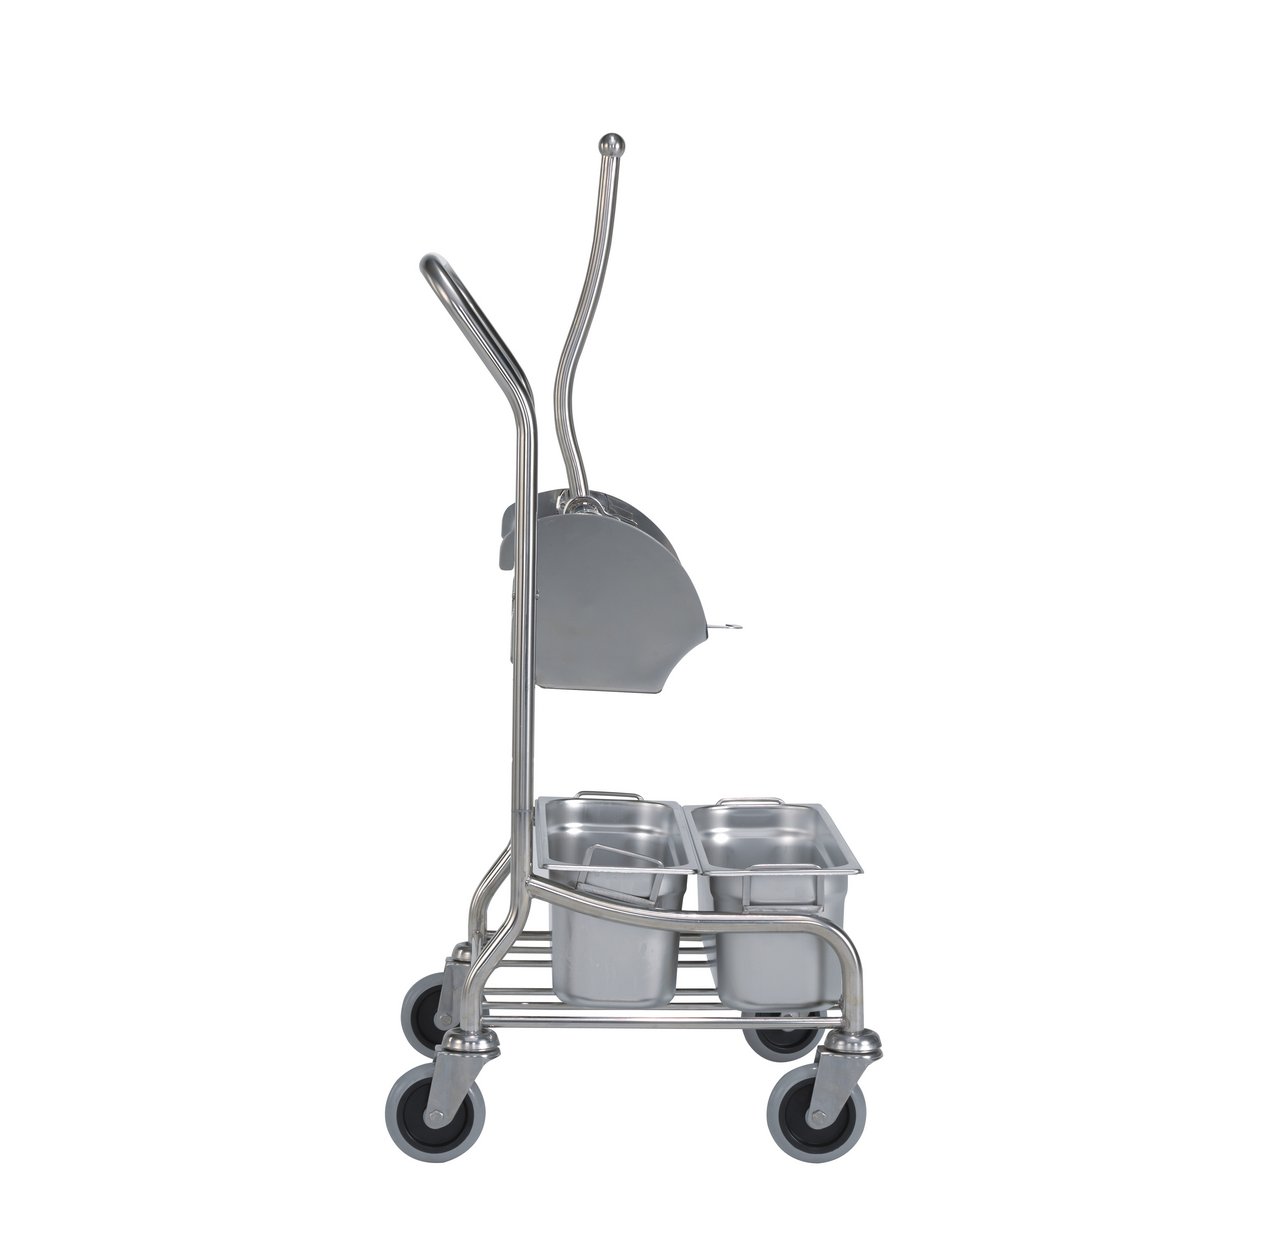 Cleanroom cleaning trolley system made of stainless steel with 2 stainless steel tubs